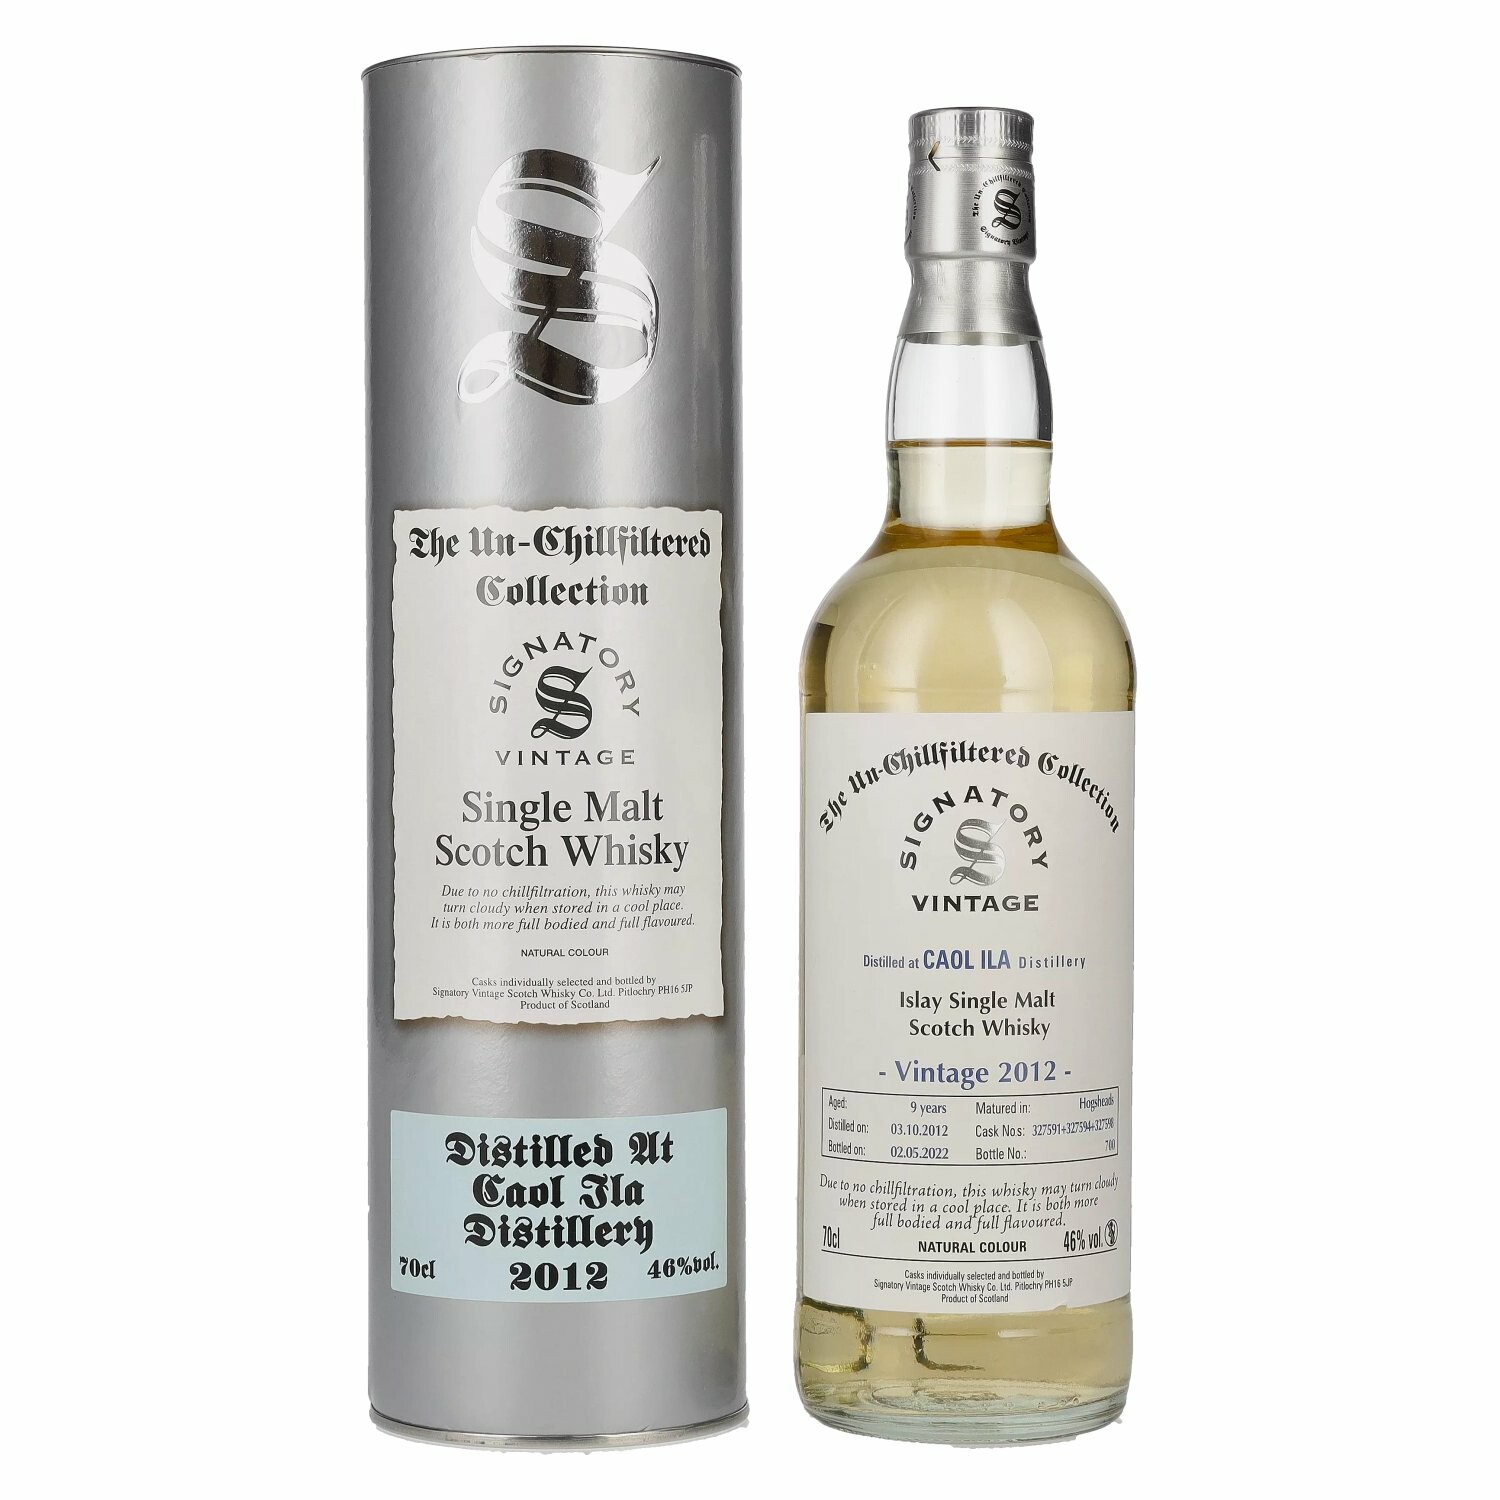 Signatory Vintage CAOL ILA 9 Years Old The Un-Chillfiltered Vintage 2012 46% Vol. 0,7l in Giftbox